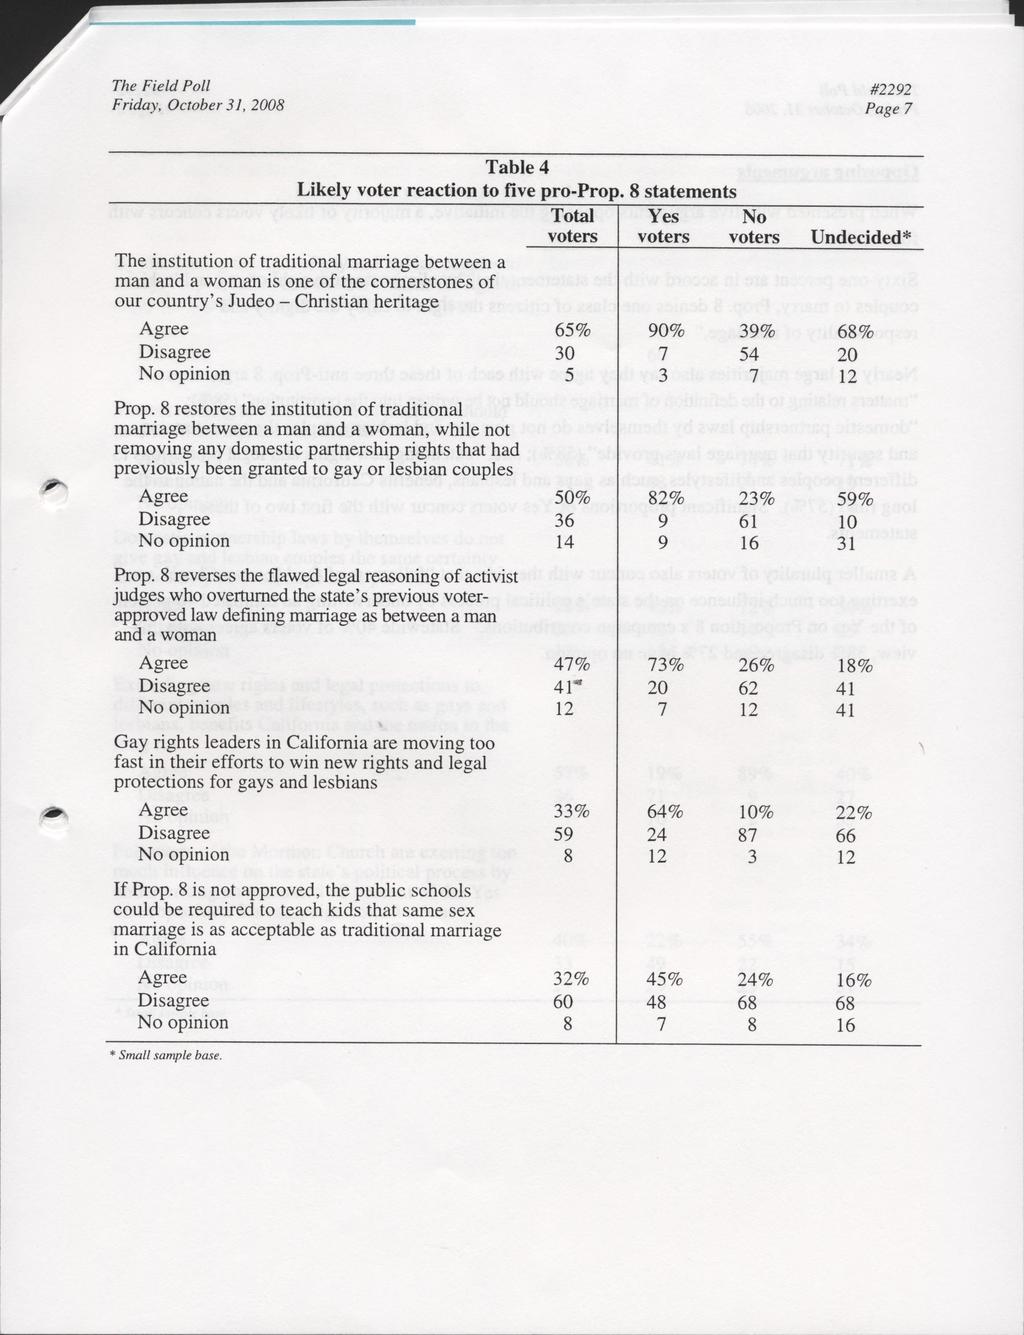 #2292 Page 7 Table 4 Likely voter reaction to five pro-prop.